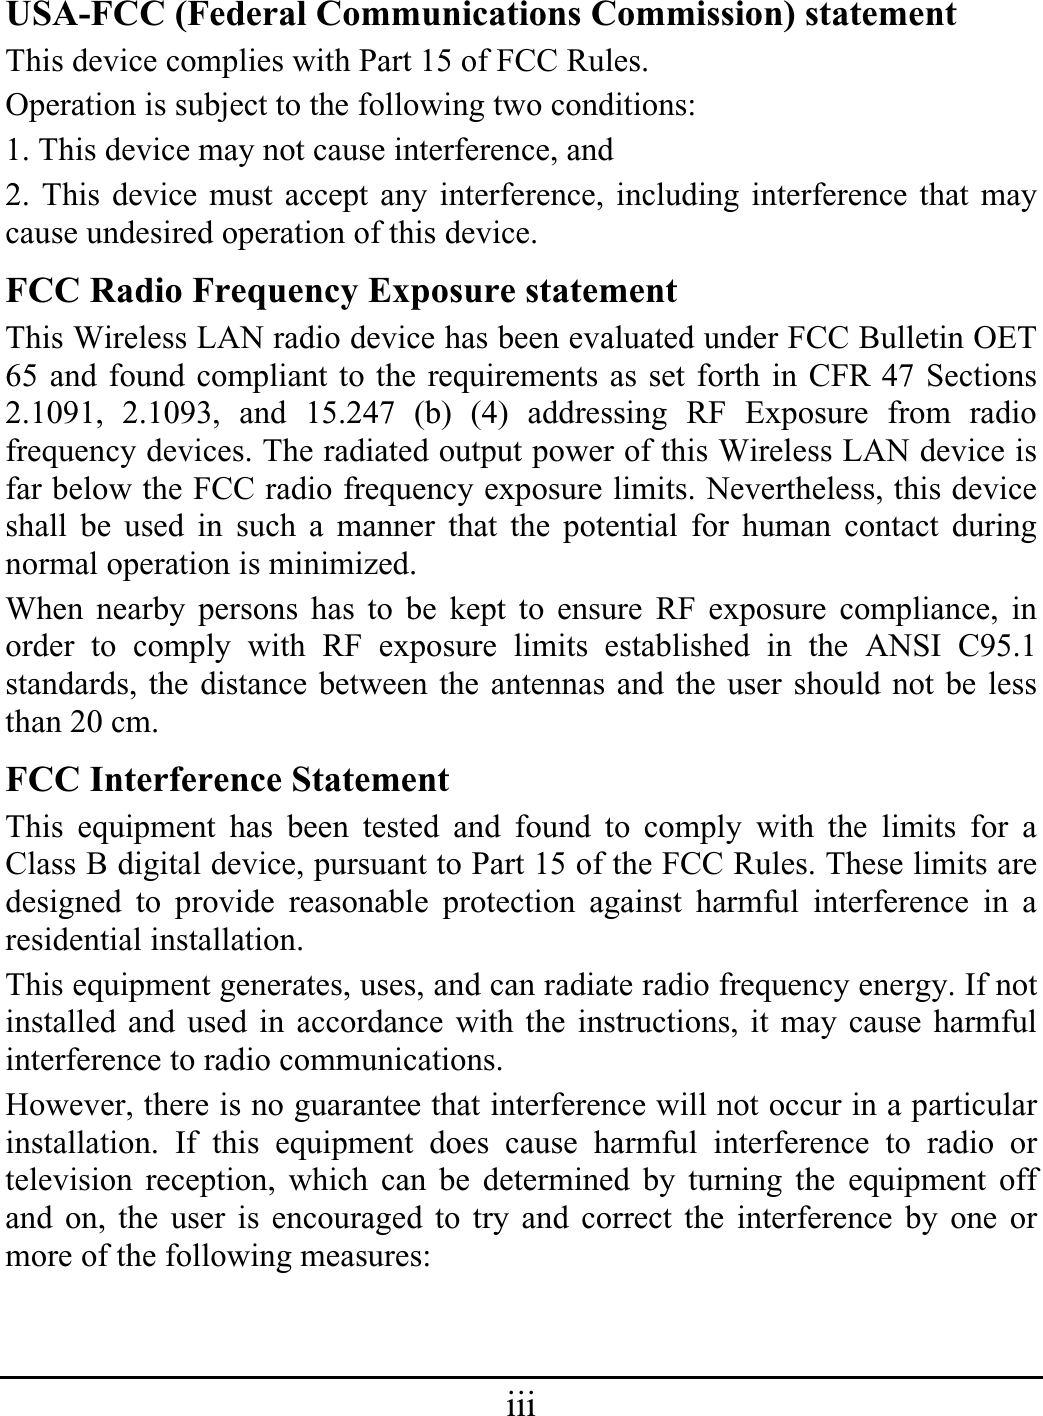 iiiUSA-FCC (Federal Communications Commission) statement This device complies with Part 15 of FCC Rules. Operation is subject to the following two conditions: 1. This device may not cause interference, and 2. This device must accept any interference, including interference that may cause undesired operation of this device. FCC Radio Frequency Exposure statement This Wireless LAN radio device has been evaluated under FCC Bulletin OET 65 and found compliant to the requirements as set forth in CFR 47 Sections 2.1091, 2.1093, and 15.247 (b) (4) addressing RF Exposure from radio frequency devices. The radiated output power of this Wireless LAN device is far below the FCC radio frequency exposure limits. Nevertheless, this device shall be used in such a manner that the potential for human contact during normal operation is minimized. When nearby persons has to be kept to ensure RF exposure compliance, in order to comply with RF exposure limits established in the ANSI C95.1 standards, the distance between the antennas and the user should not be less than 20 cm. FCC Interference Statement This equipment has been tested and found to comply with the limits for a Class B digital device, pursuant to Part 15 of the FCC Rules. These limits are designed to provide reasonable protection against harmful interference in a residential installation. This equipment generates, uses, and can radiate radio frequency energy. If not installed and used in accordance with the instructions, it may cause harmful interference to radio communications. However, there is no guarantee that interference will not occur in a particular installation. If this equipment does cause harmful interference to radio or television reception, which can be determined by turning the equipment off and on, the user is encouraged to try and correct the interference by one or more of the following measures: 